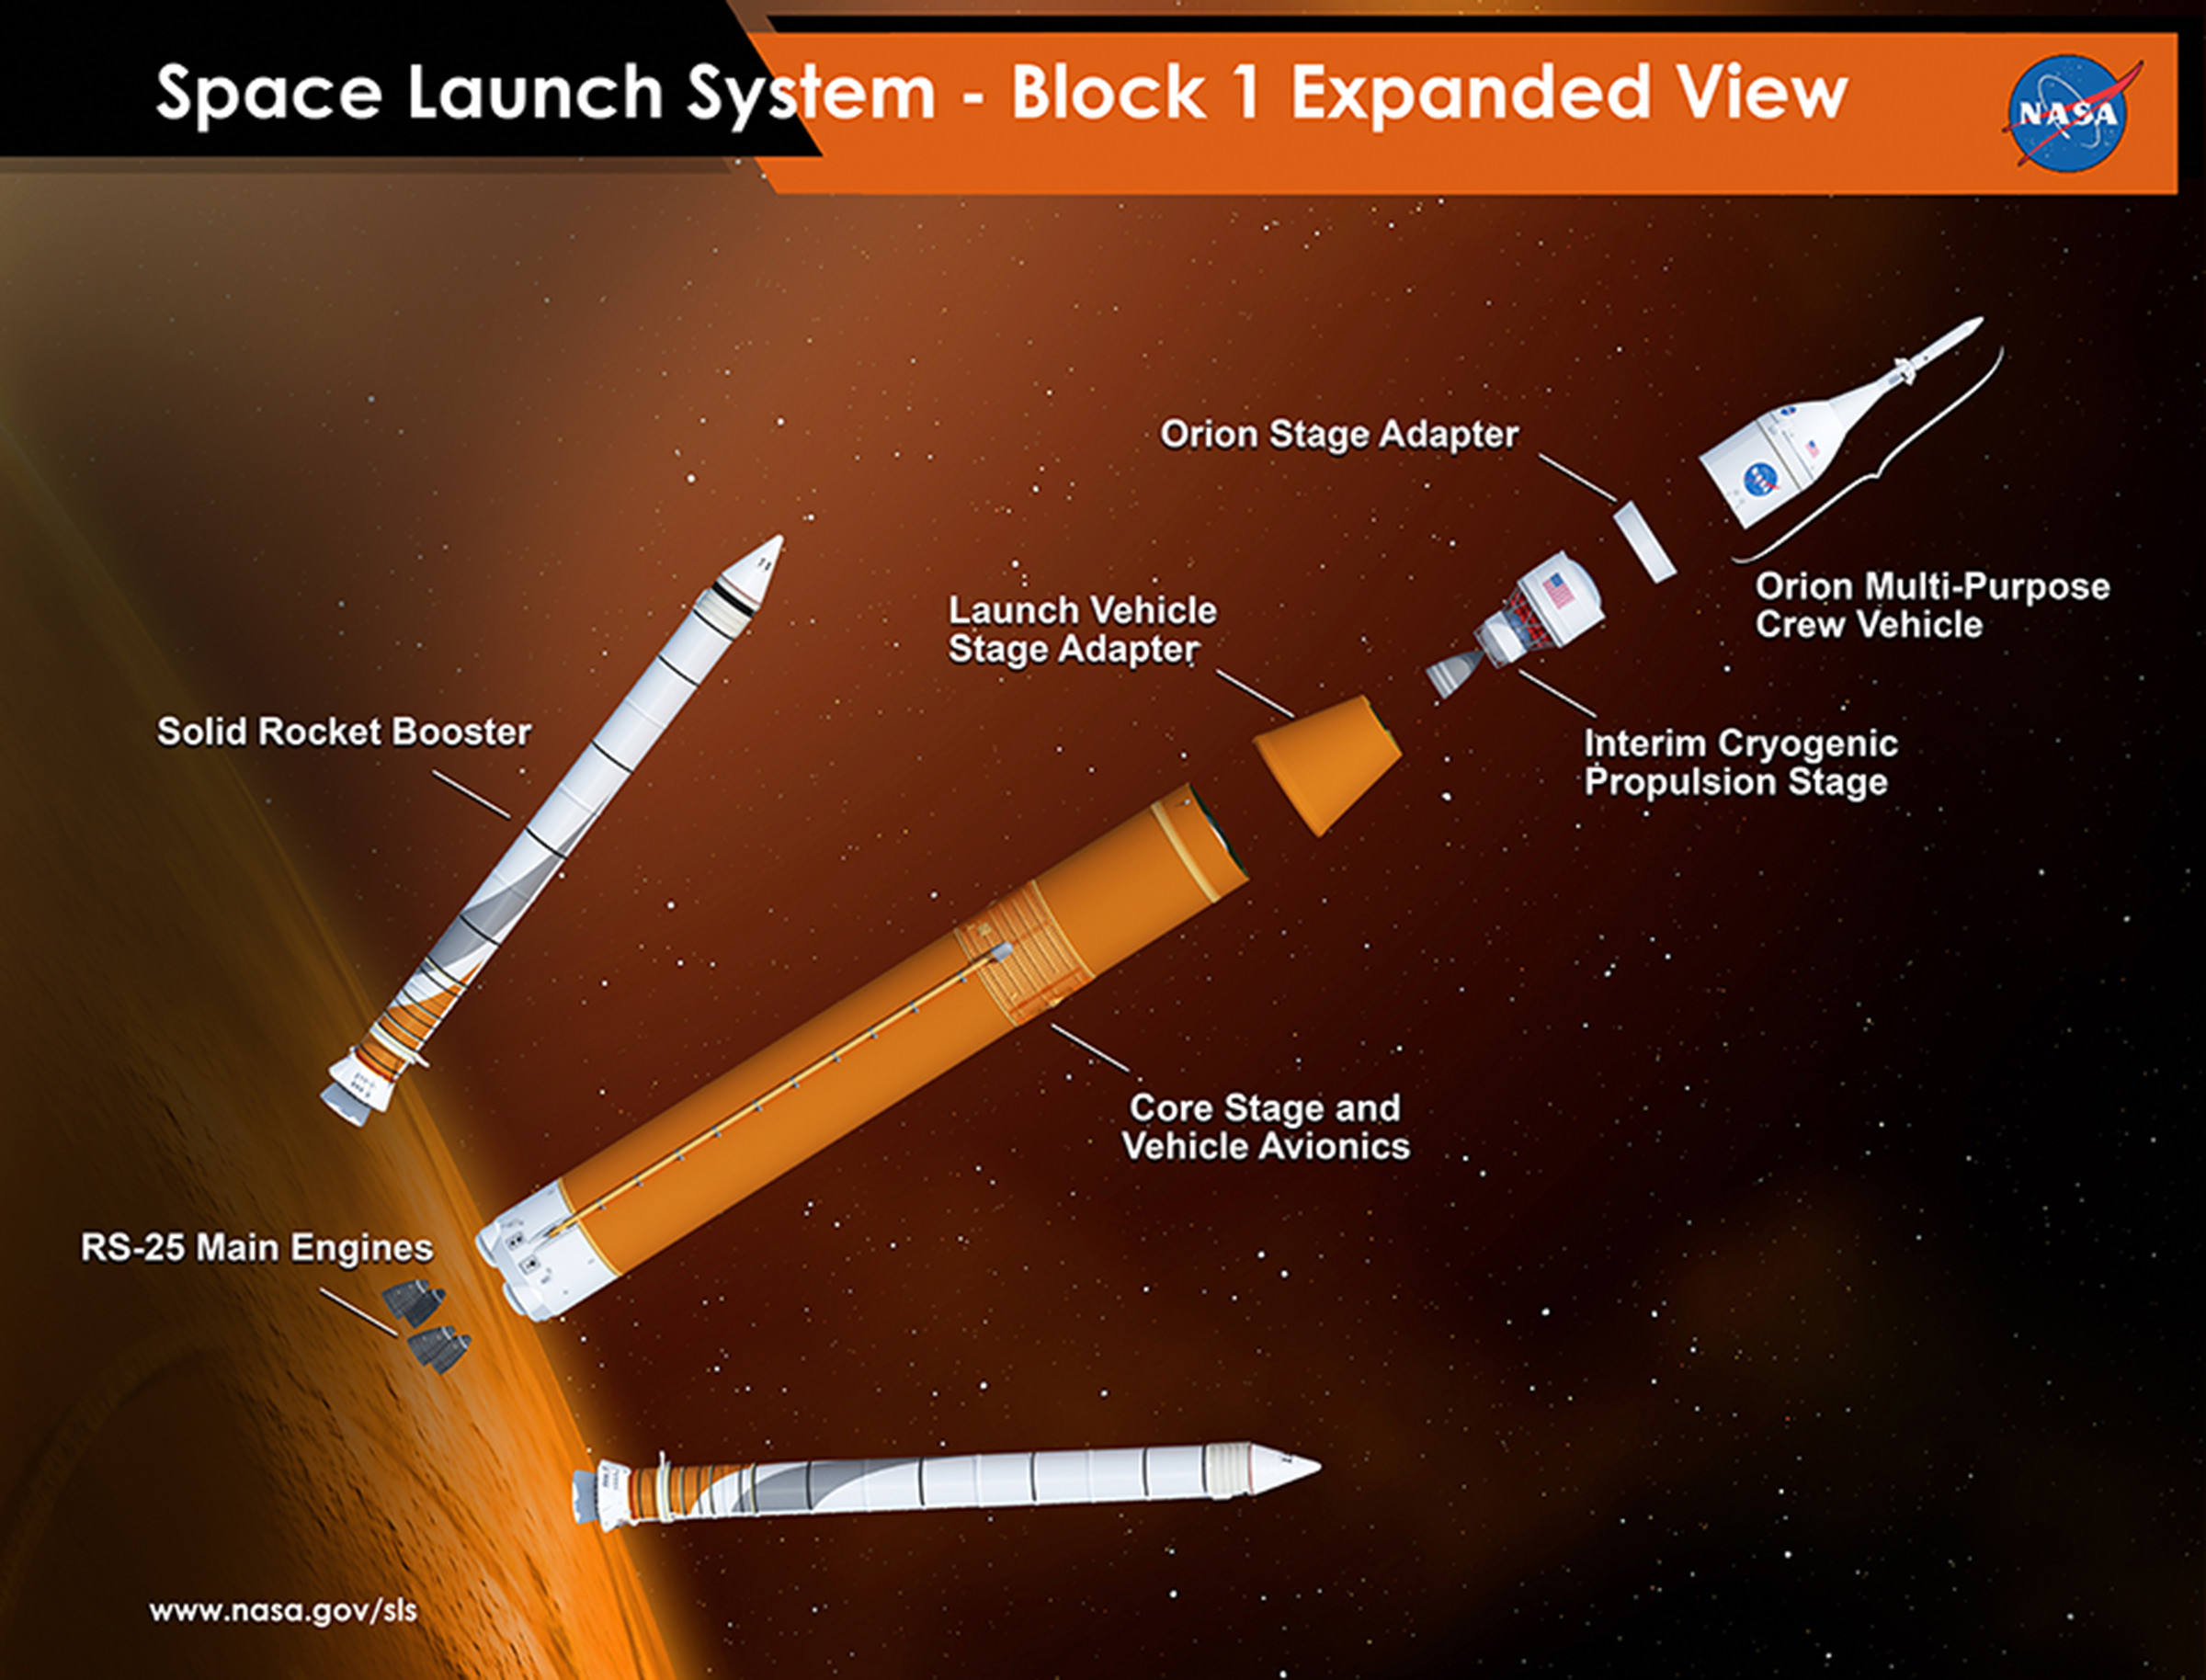 Graphic shows Block I configuration of NASA’s Space Launch System (SLS). Credits: NASA/MSFC